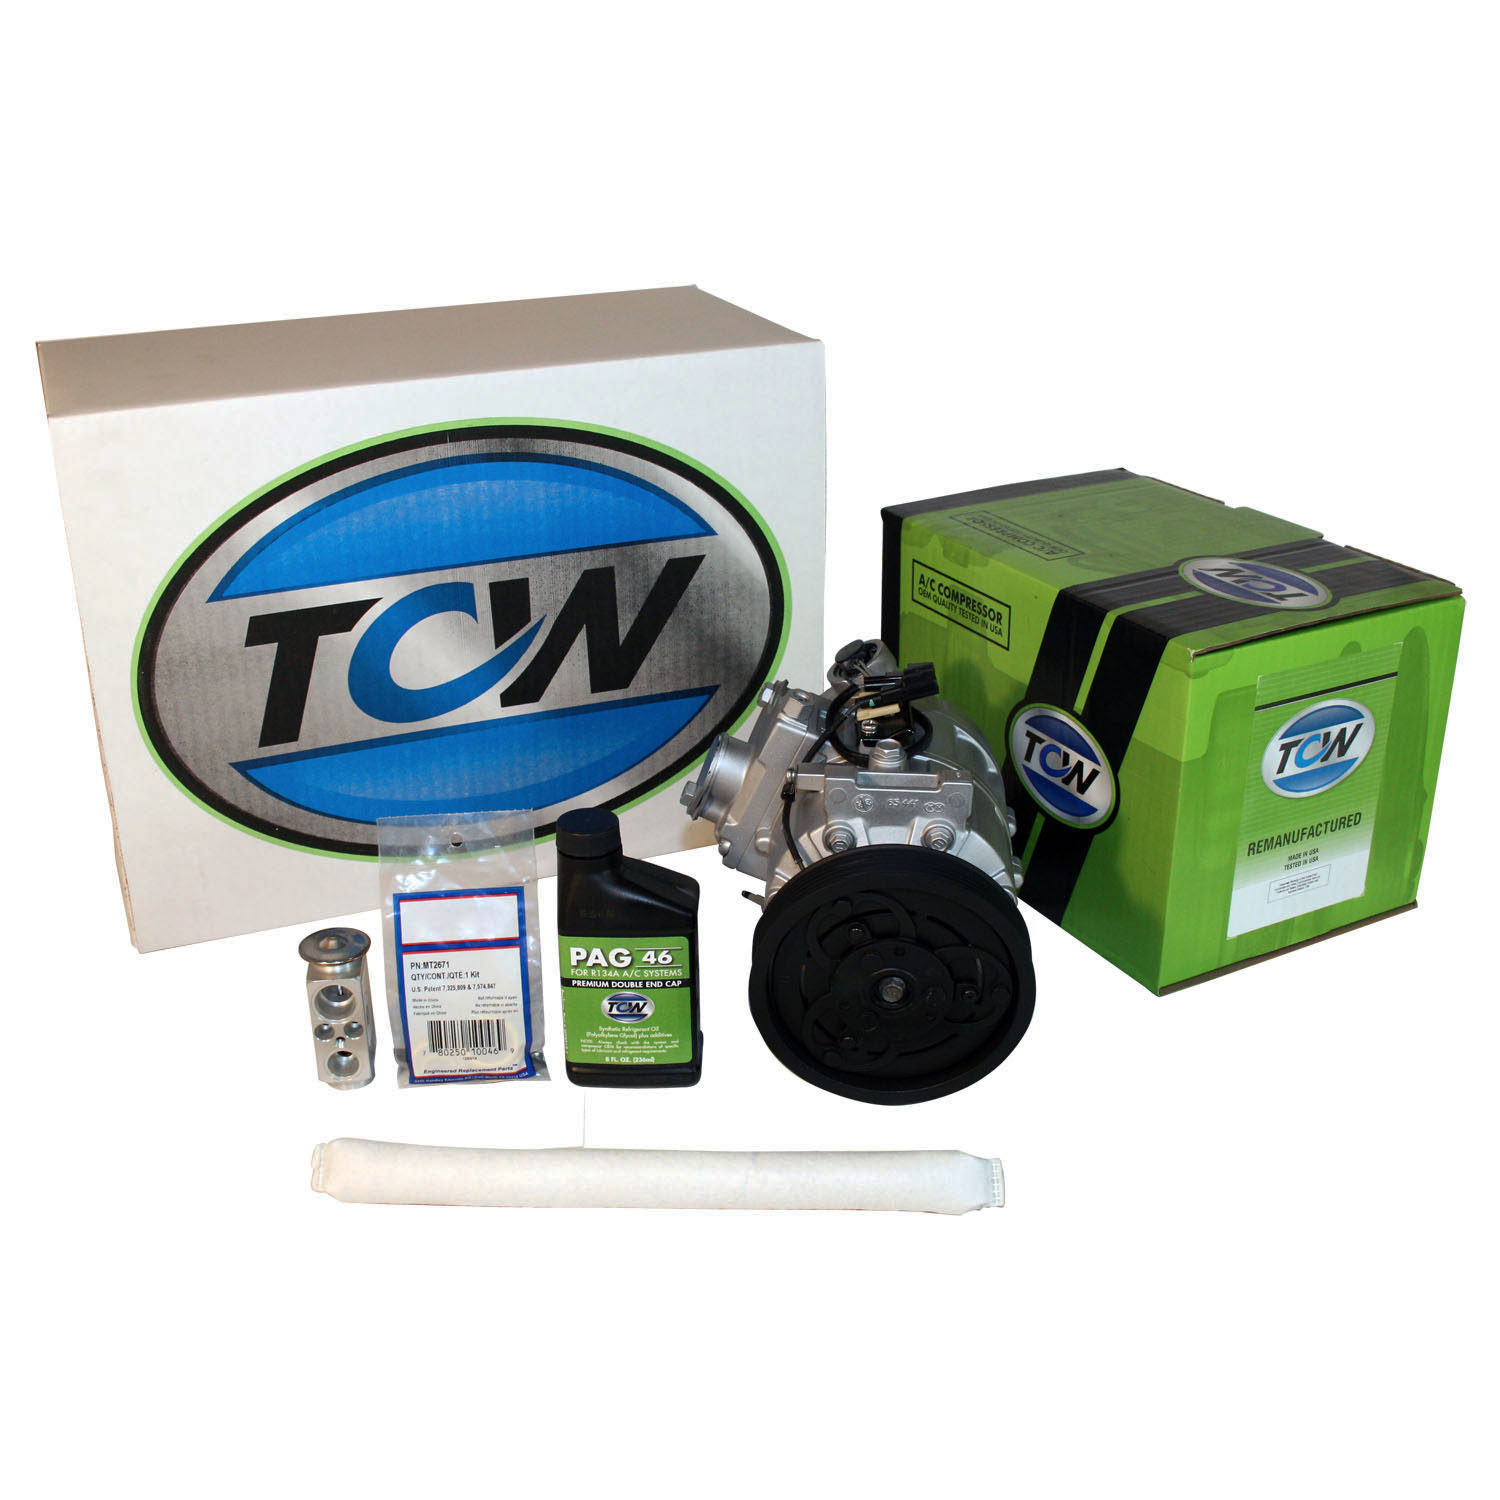 TCW Vehicle A/C Kit K1000480R Remanufactured Product Image field_60b6a13a6e67c